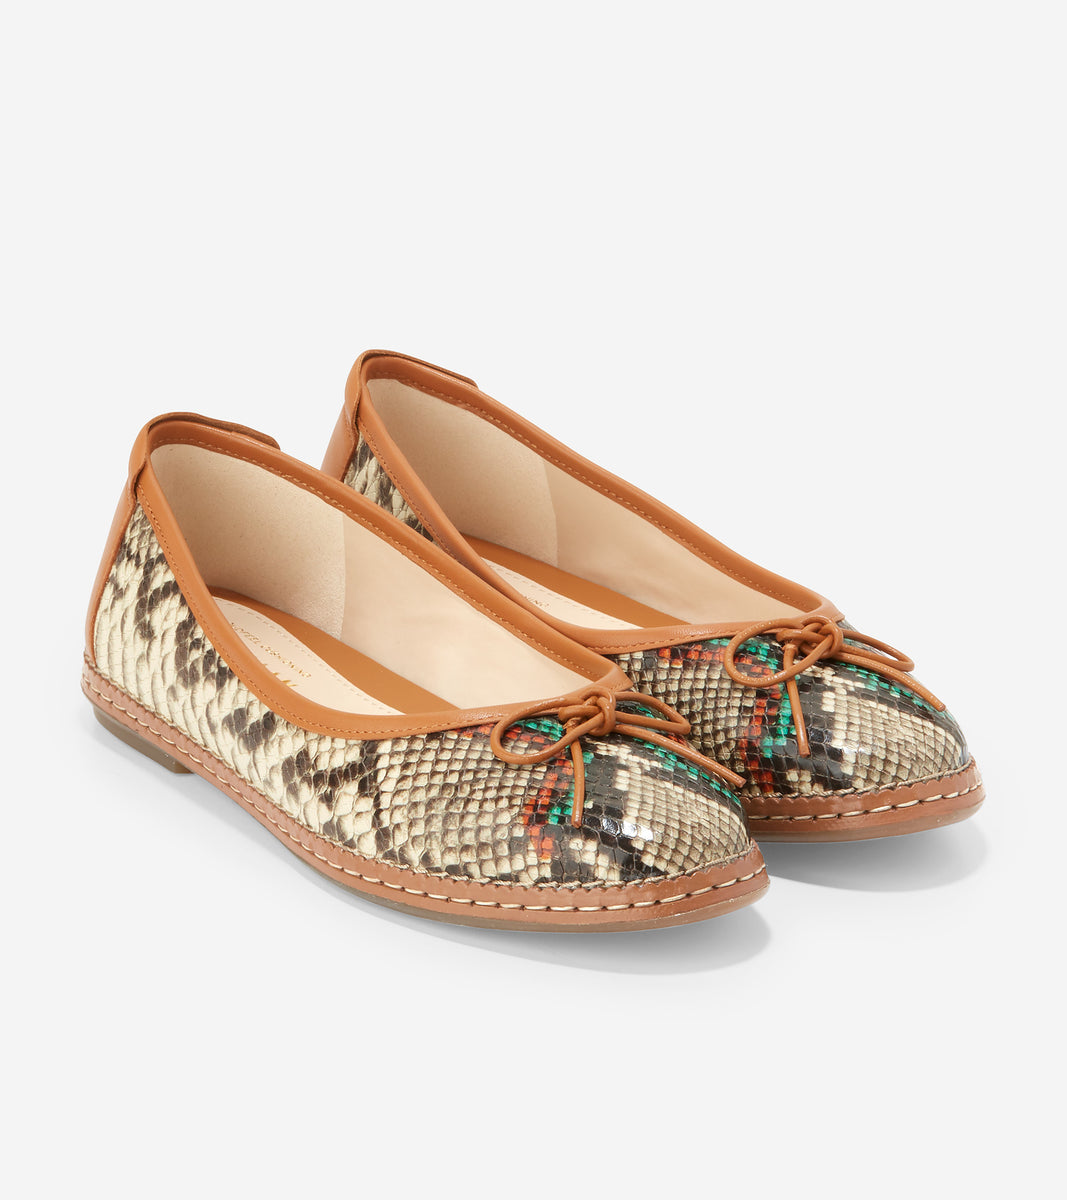 ColeHaan-Cloudfeel All-Day Ballet Flat-w21877-Crafted Snake Print